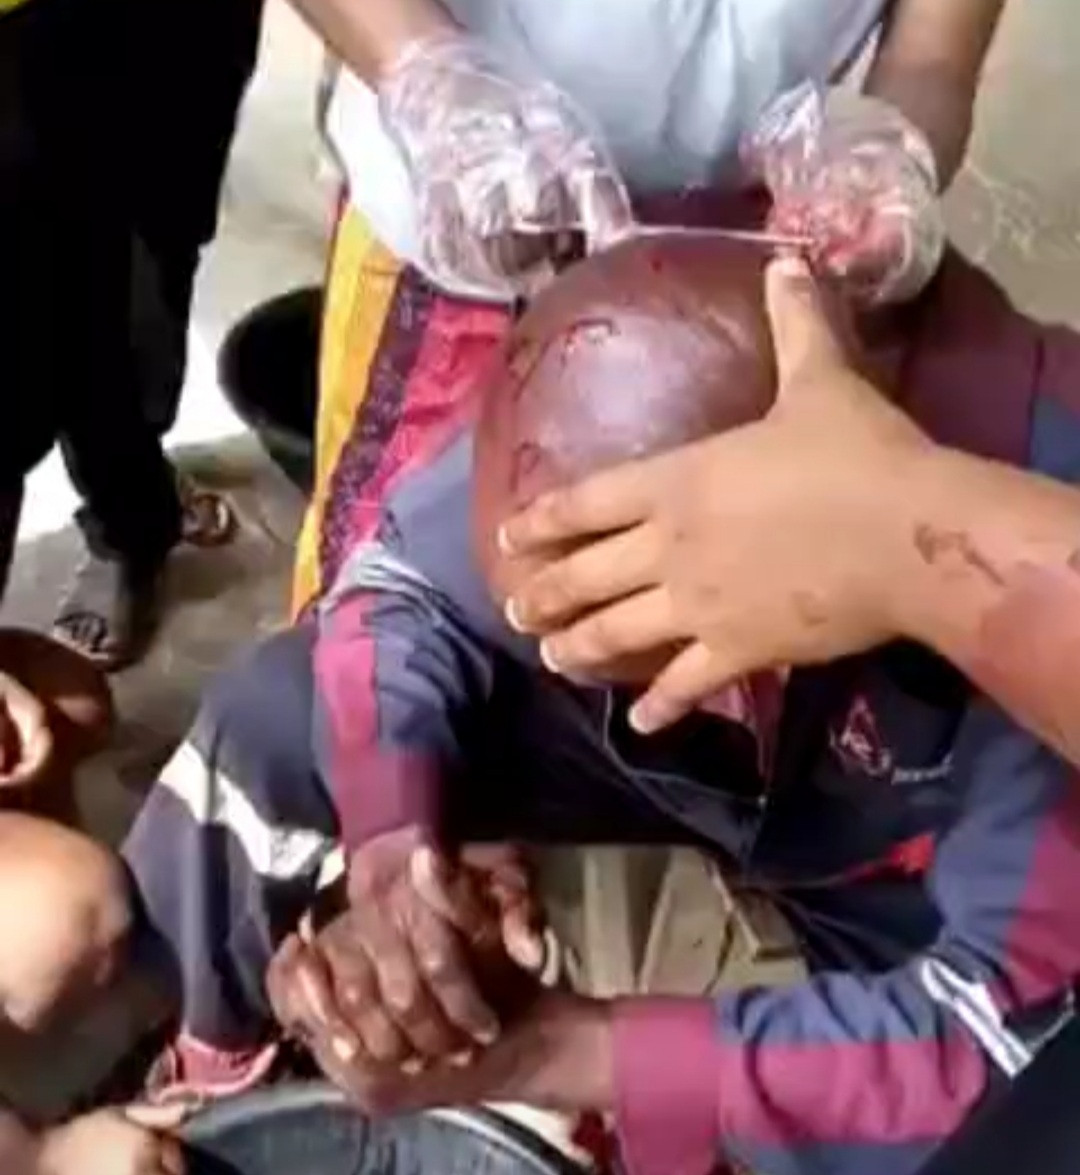 IKEDC staff stabbed on the head with bottle when he tried to disconnect power from a community (video)